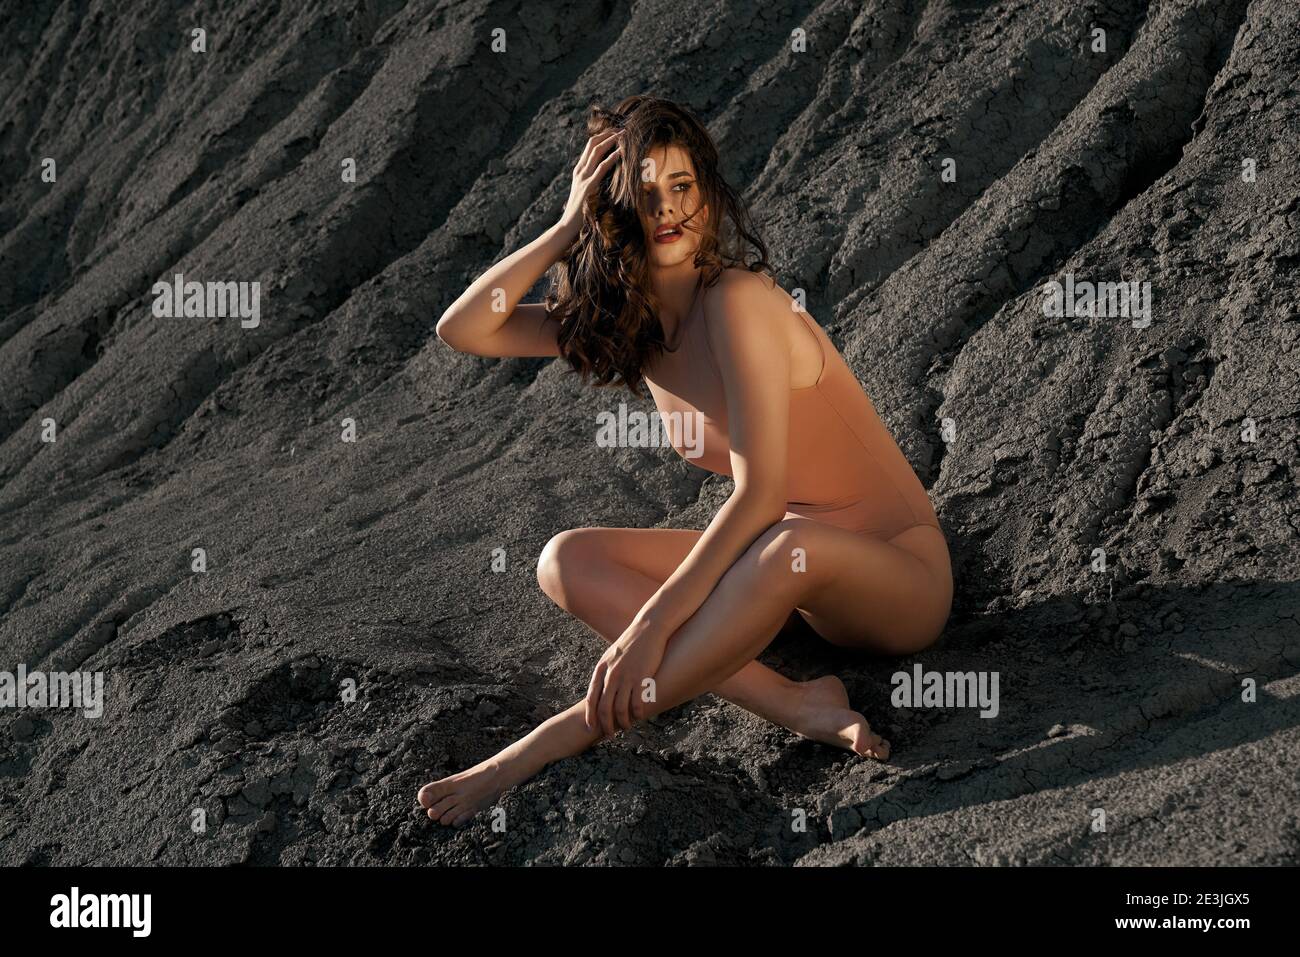 Side view of astonishing female model wearing beige body posing in dry empty quarry. Young barefoot stylish woman sitting on black sand outdoors in ho Stock Photo